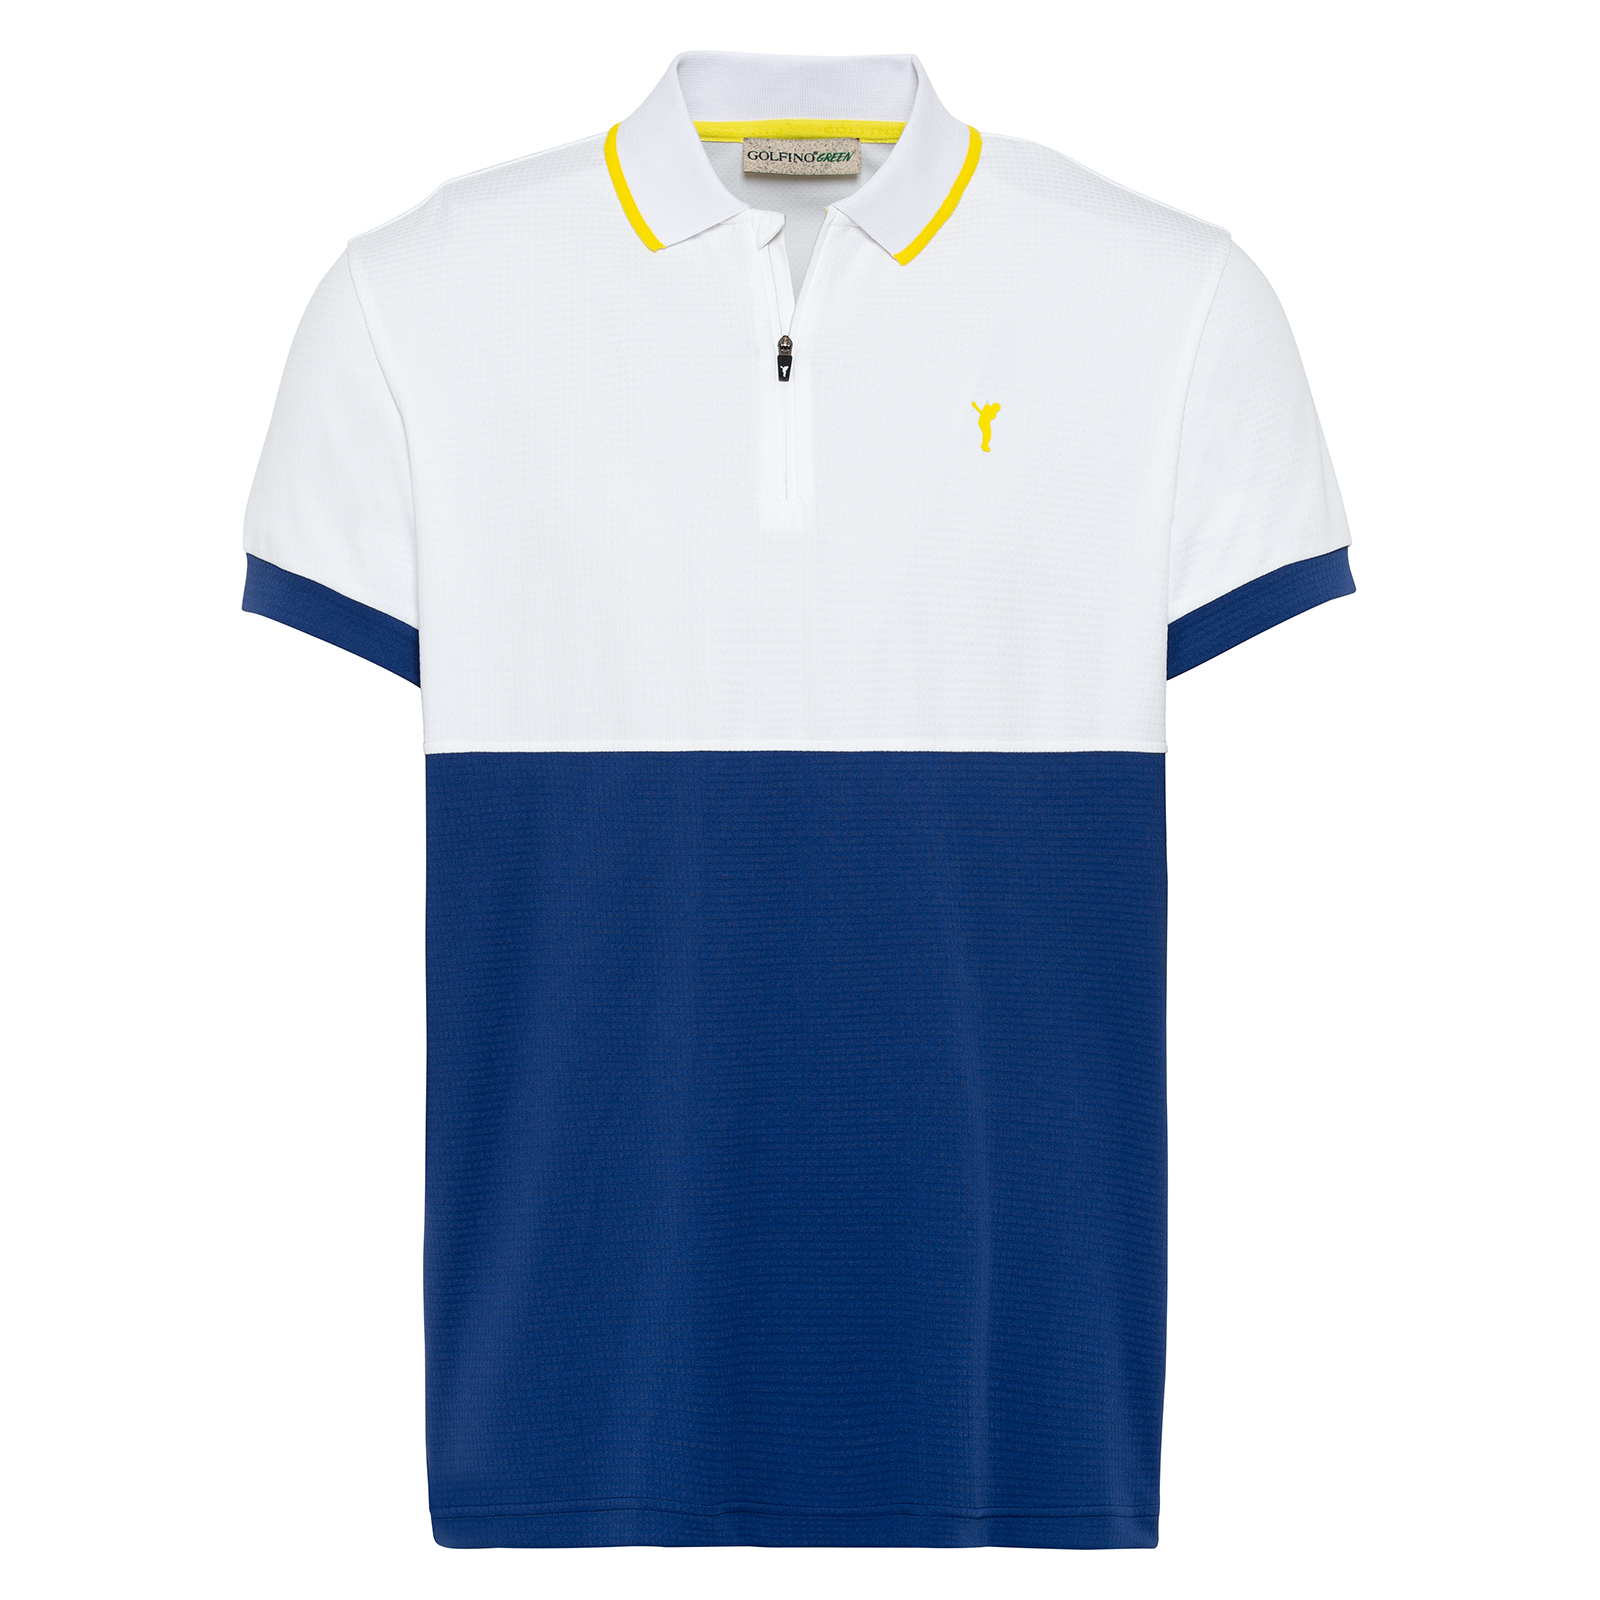 Men's quick dry golf polo shirt made from recycled jacquard 